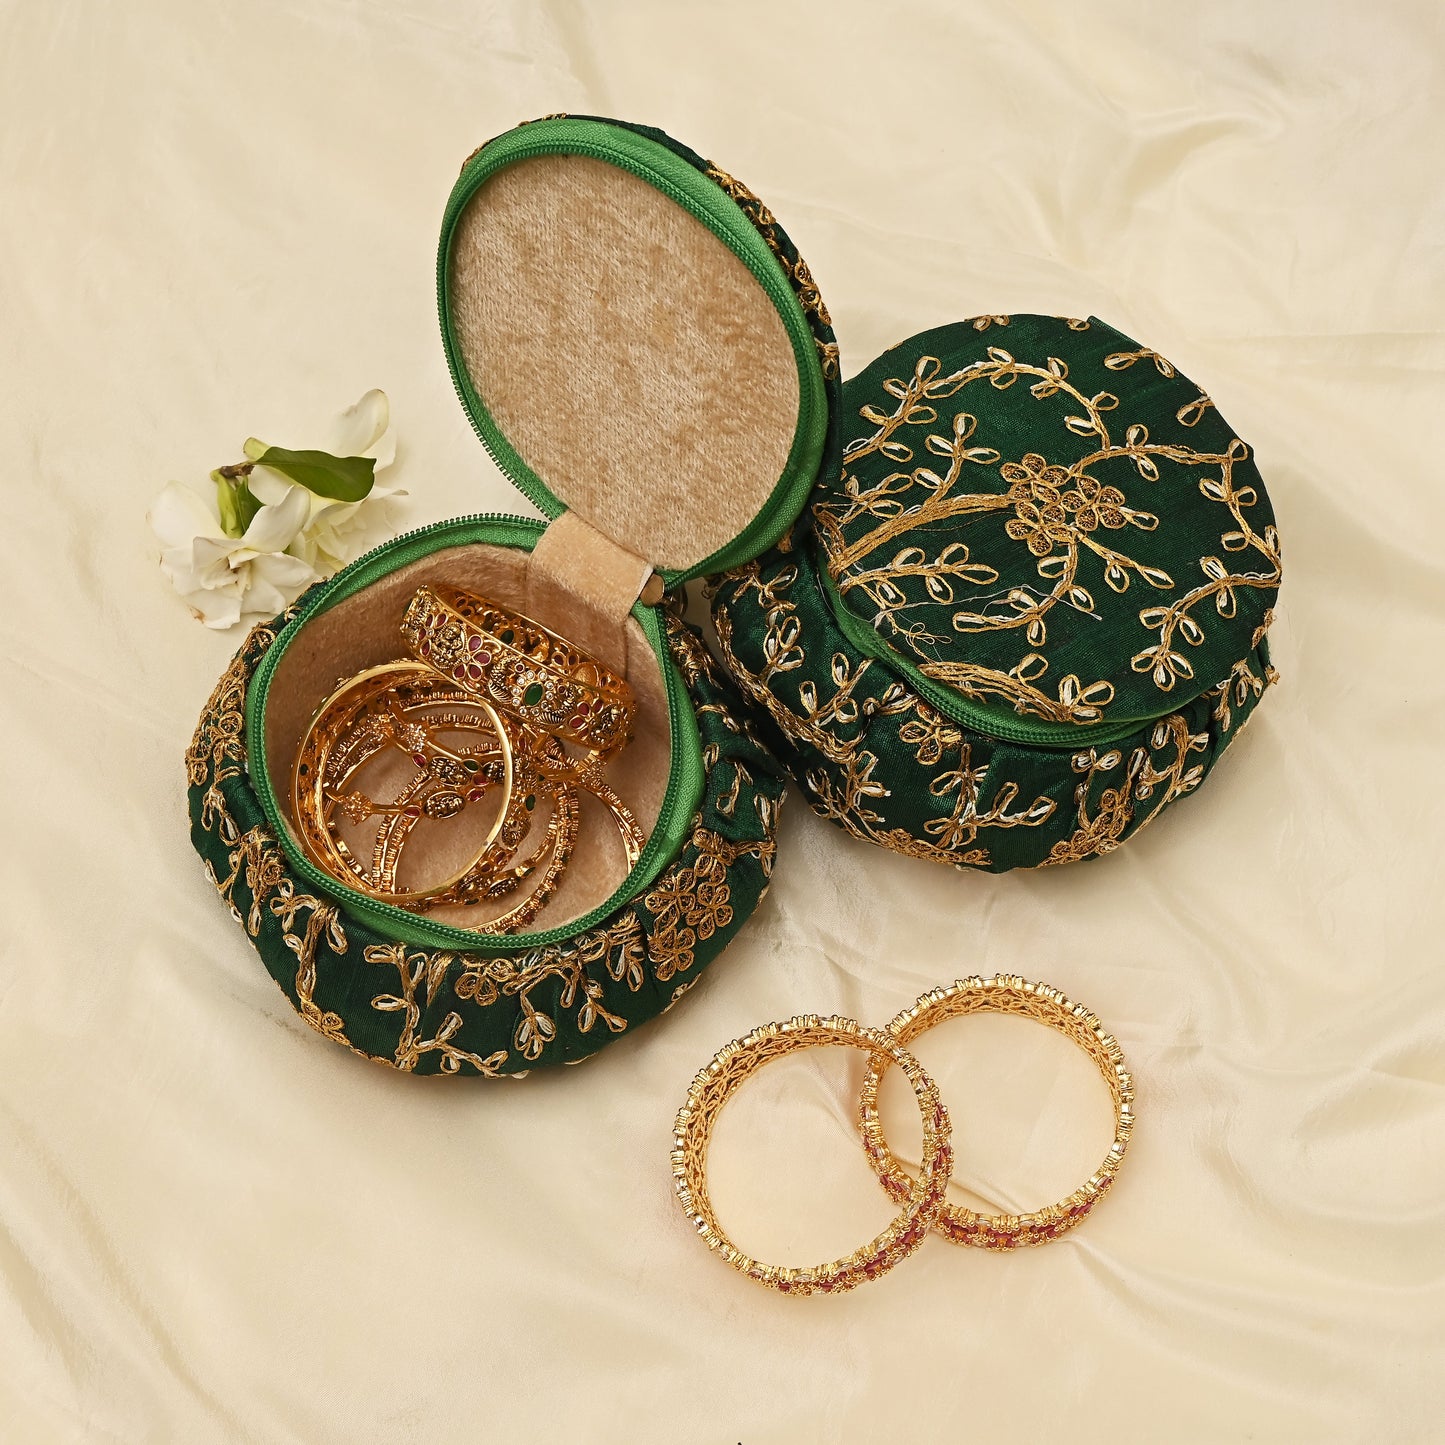 Exquisite Embroidered Silk Fabric Big Matki Bangle Box - The Perfect Return Gift For All Ages - Green